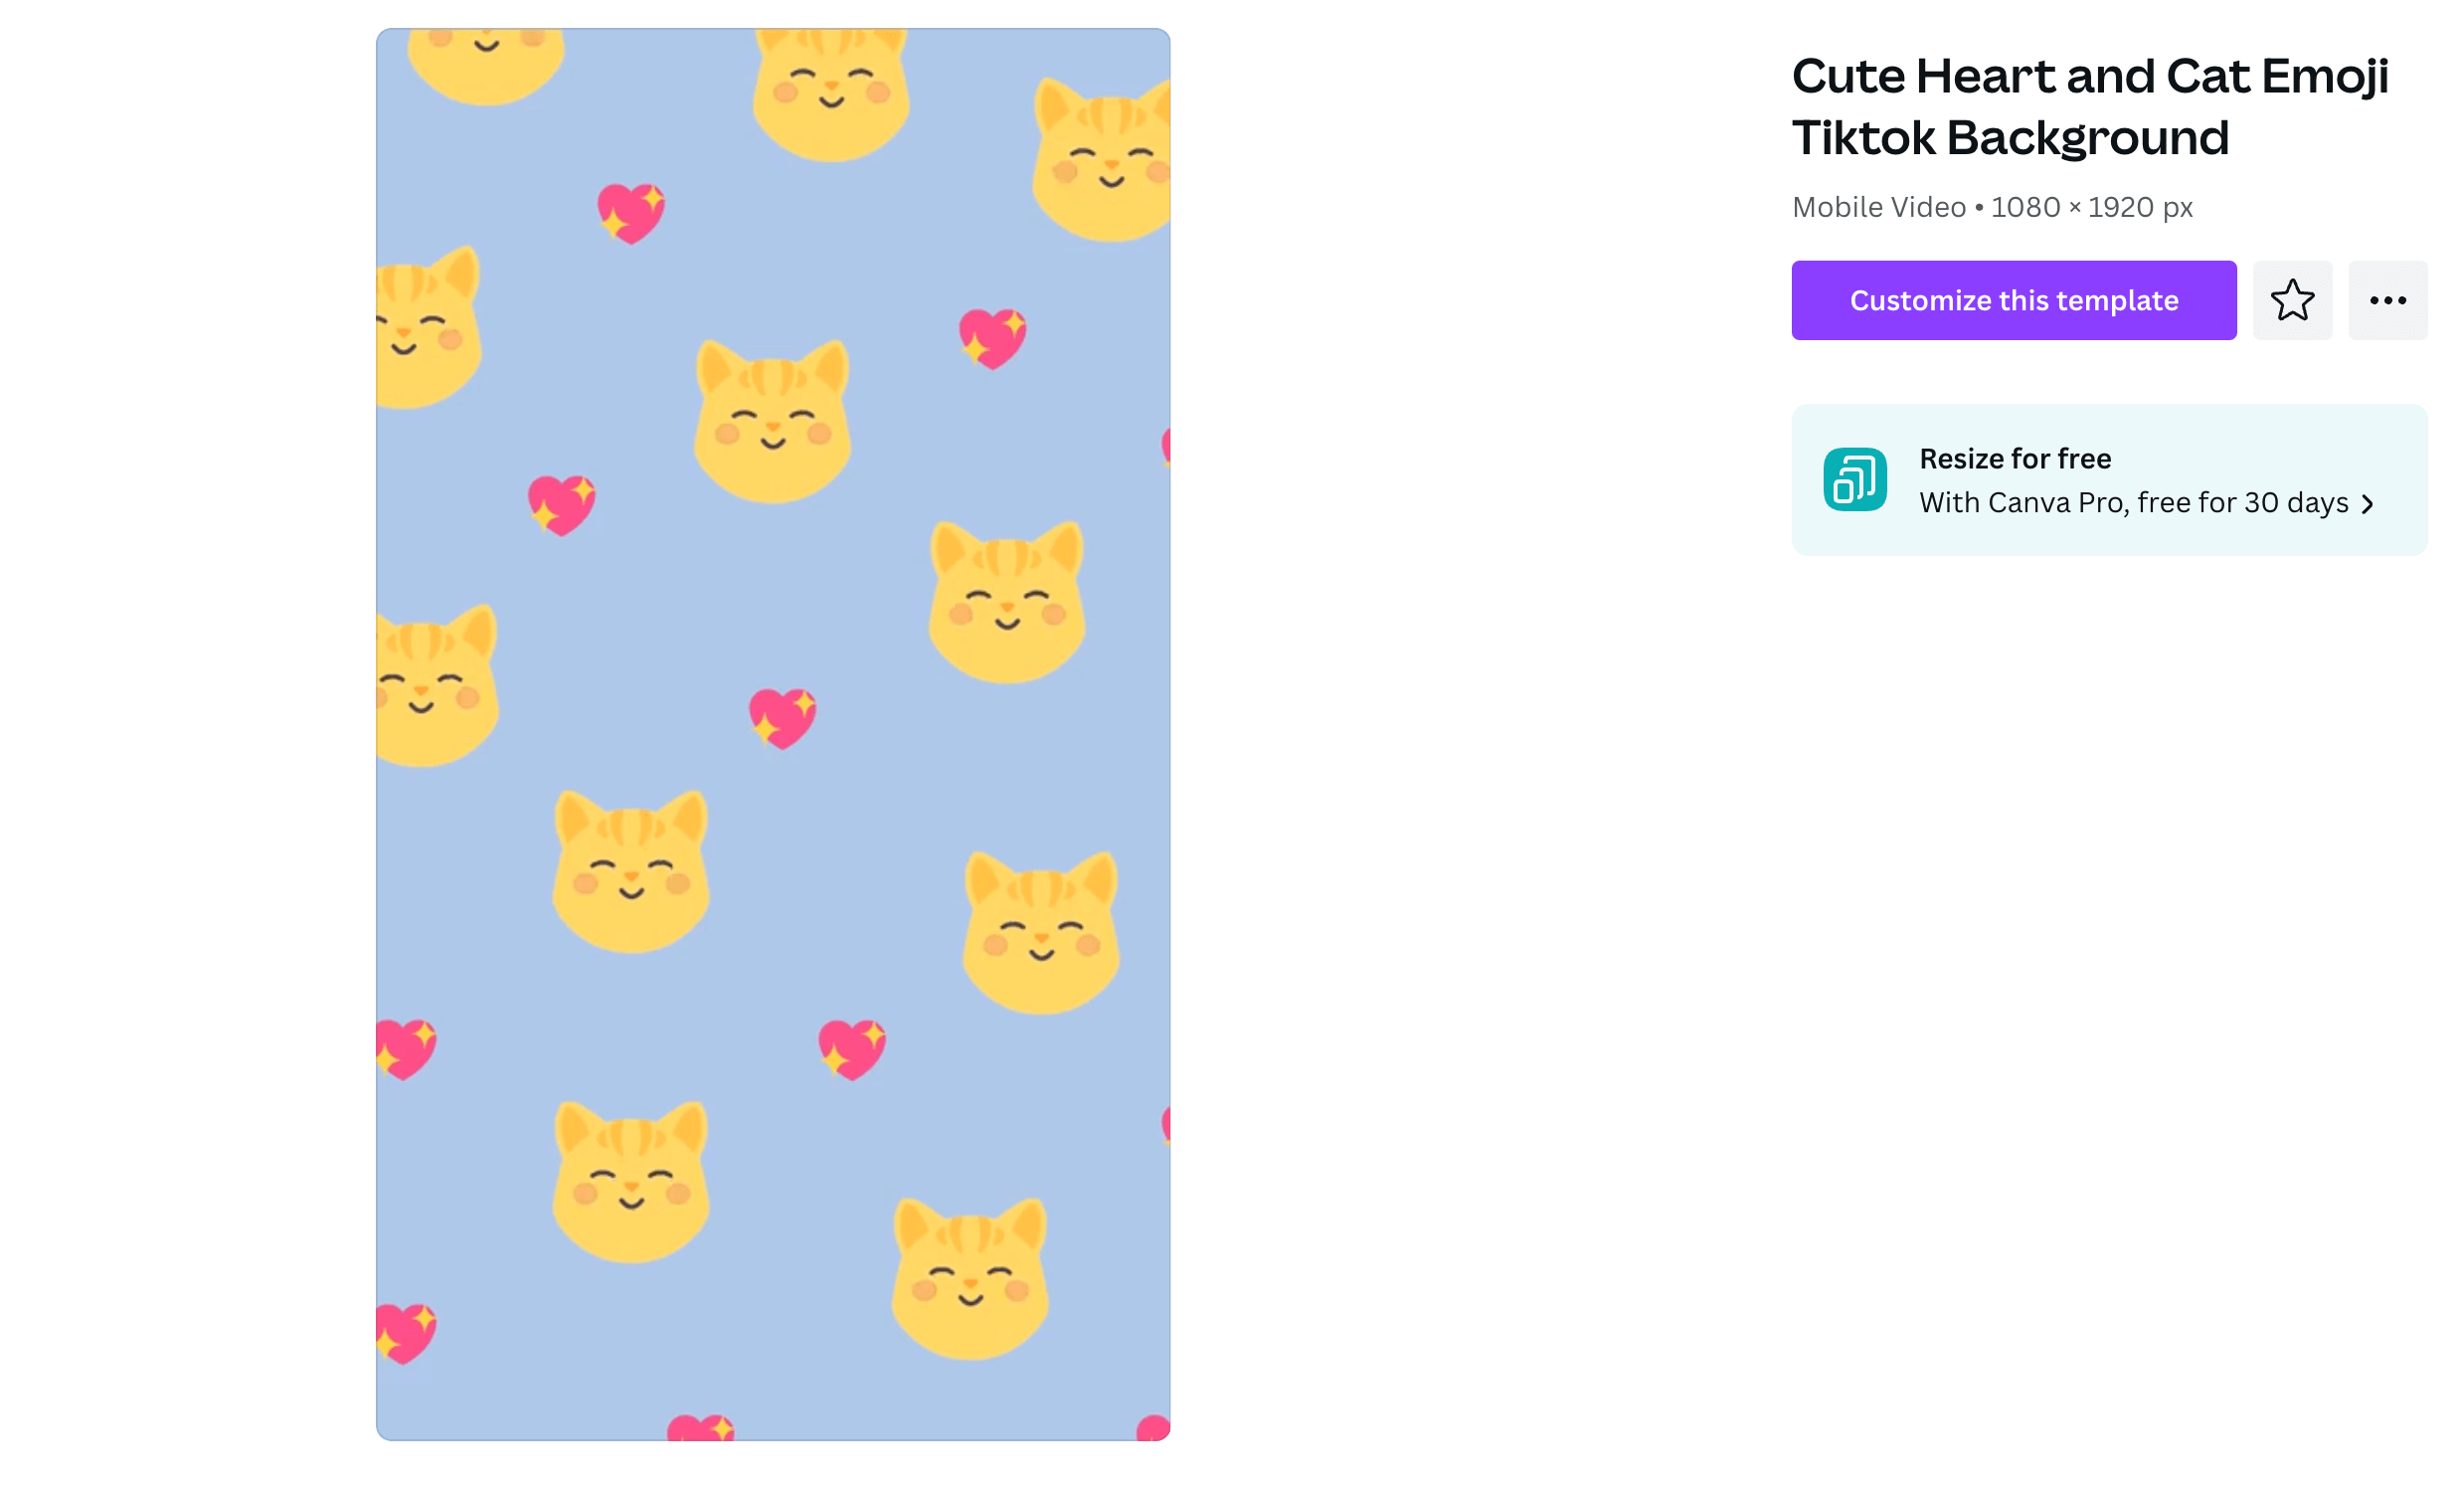 A background pattern of smiling cat and sparkling heart emojis